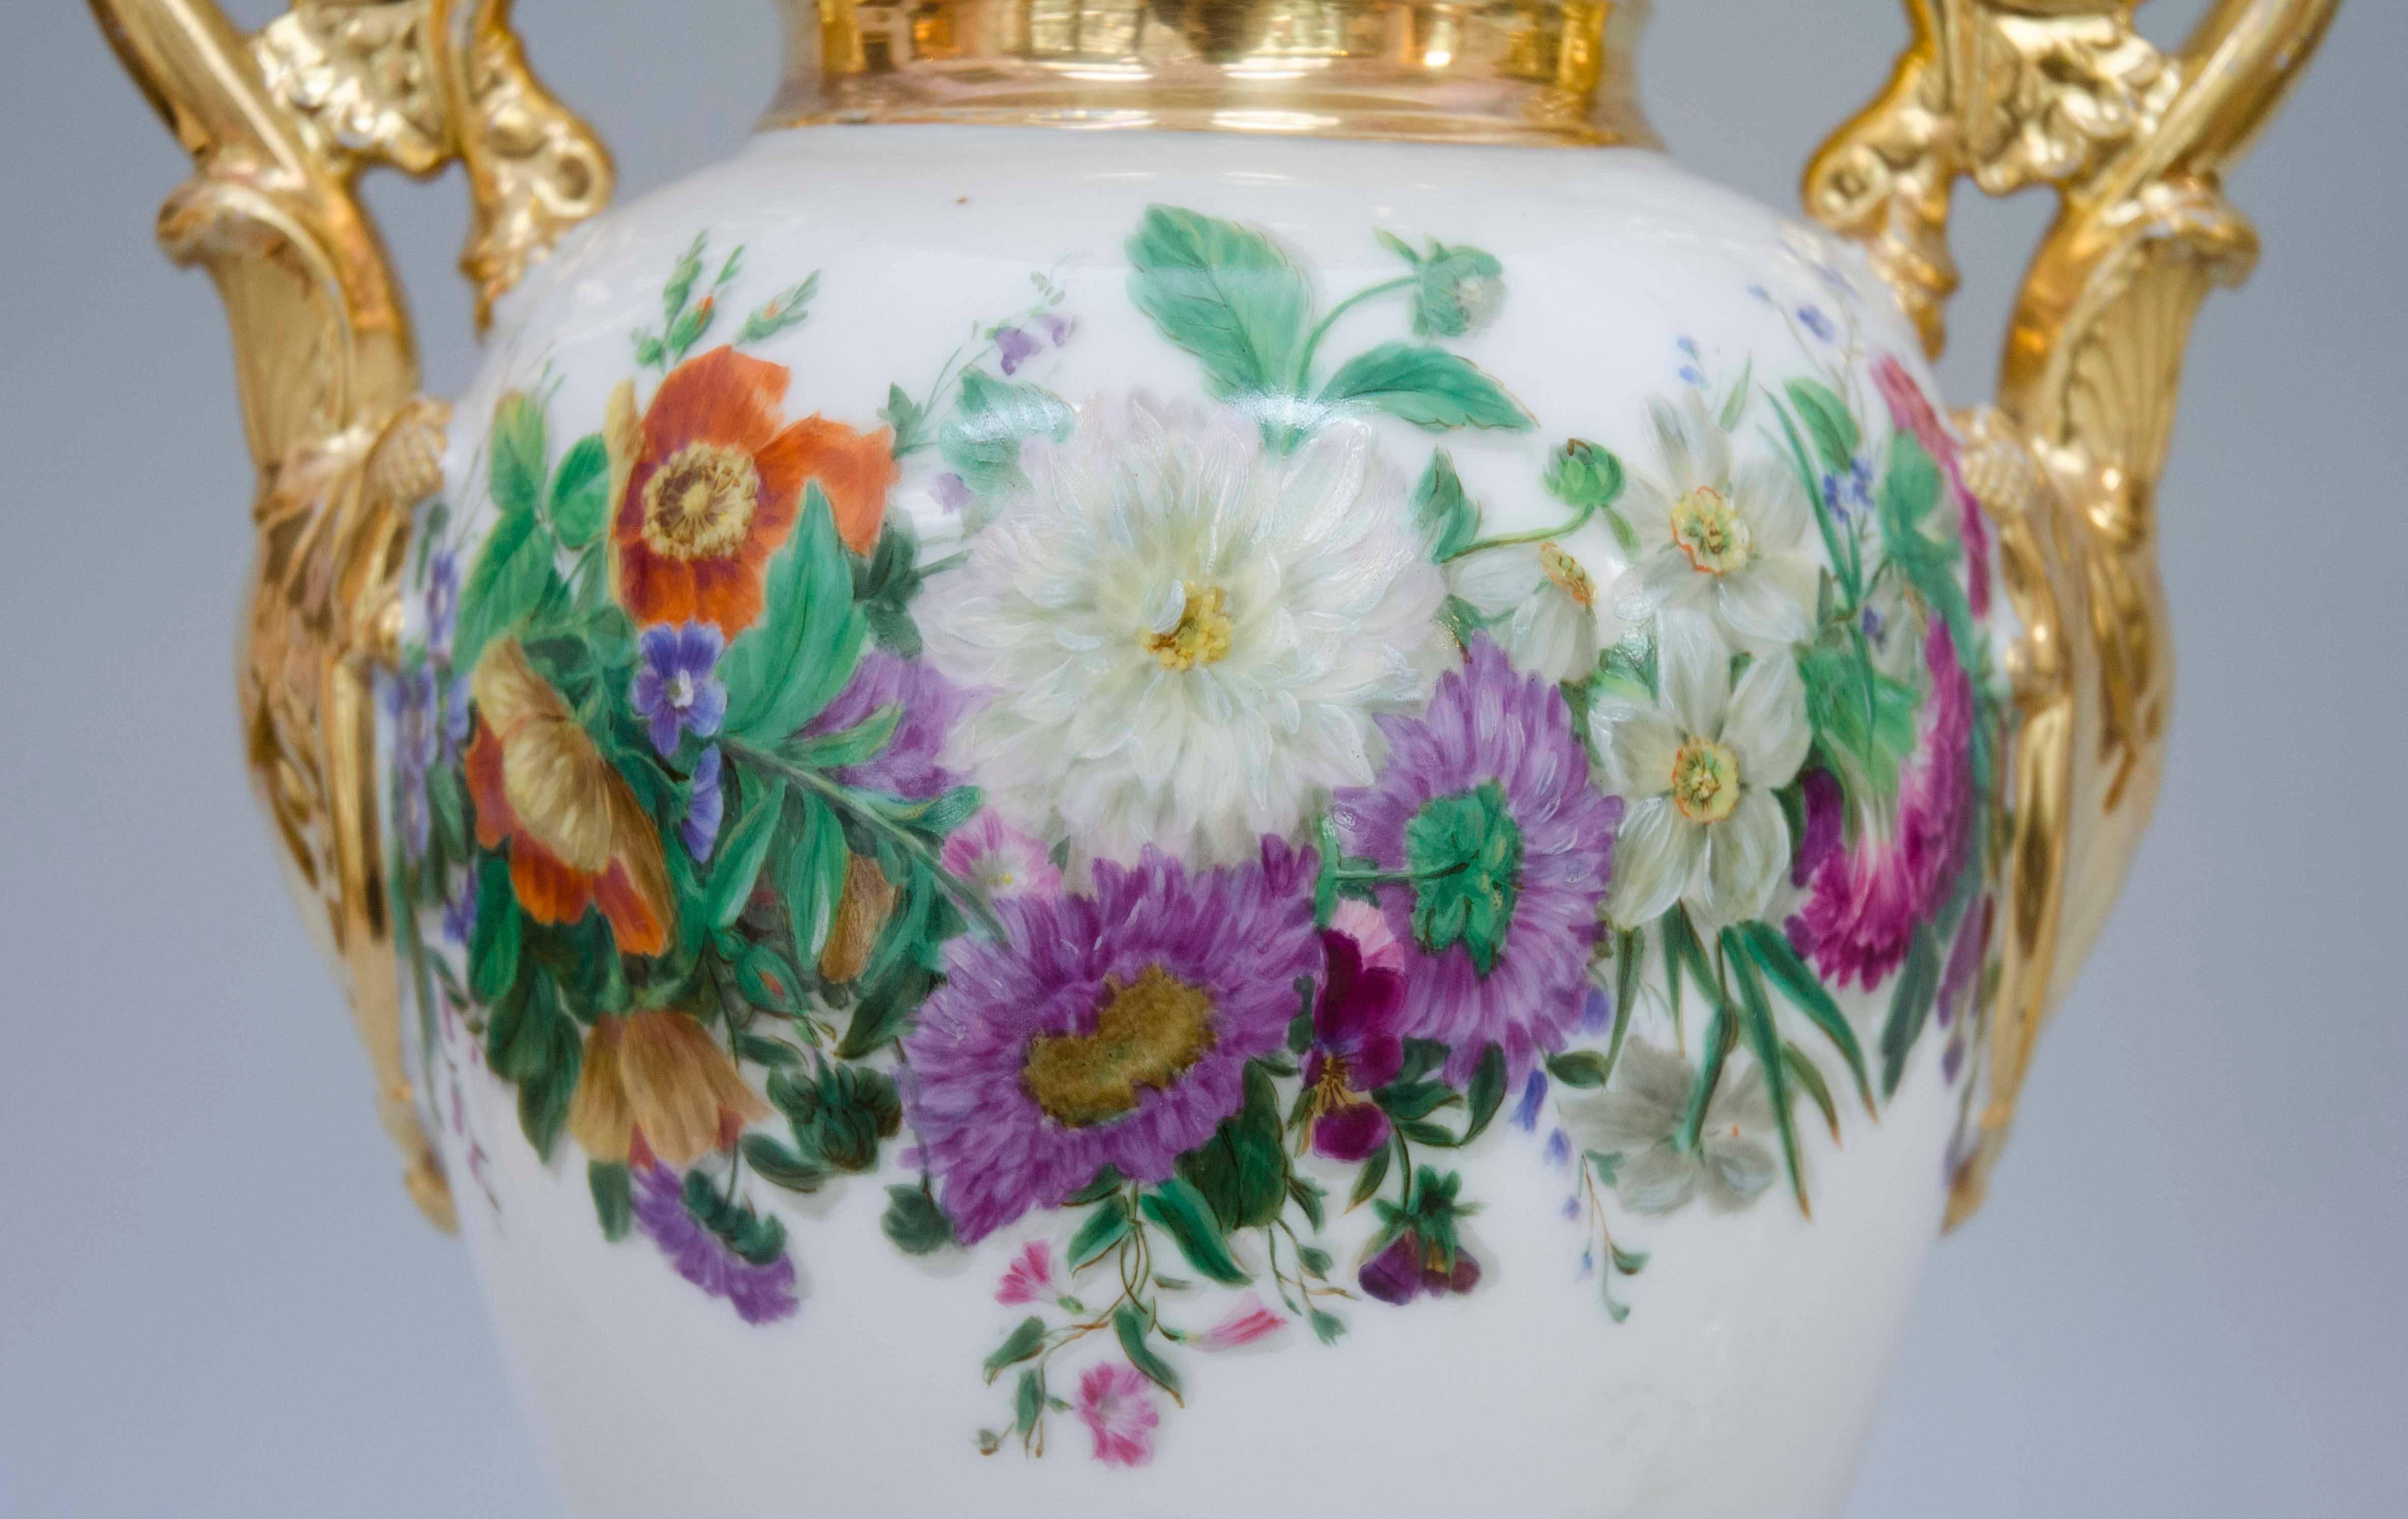 Stunning pair of egg shaped vases on piedouche bases with natural flowers garlands on white ground, rocailles scrolls on the gilt handles. Very decorative pair in a very fresh condition. Nice quality of gilding. 
Porcelain of Paris, circa